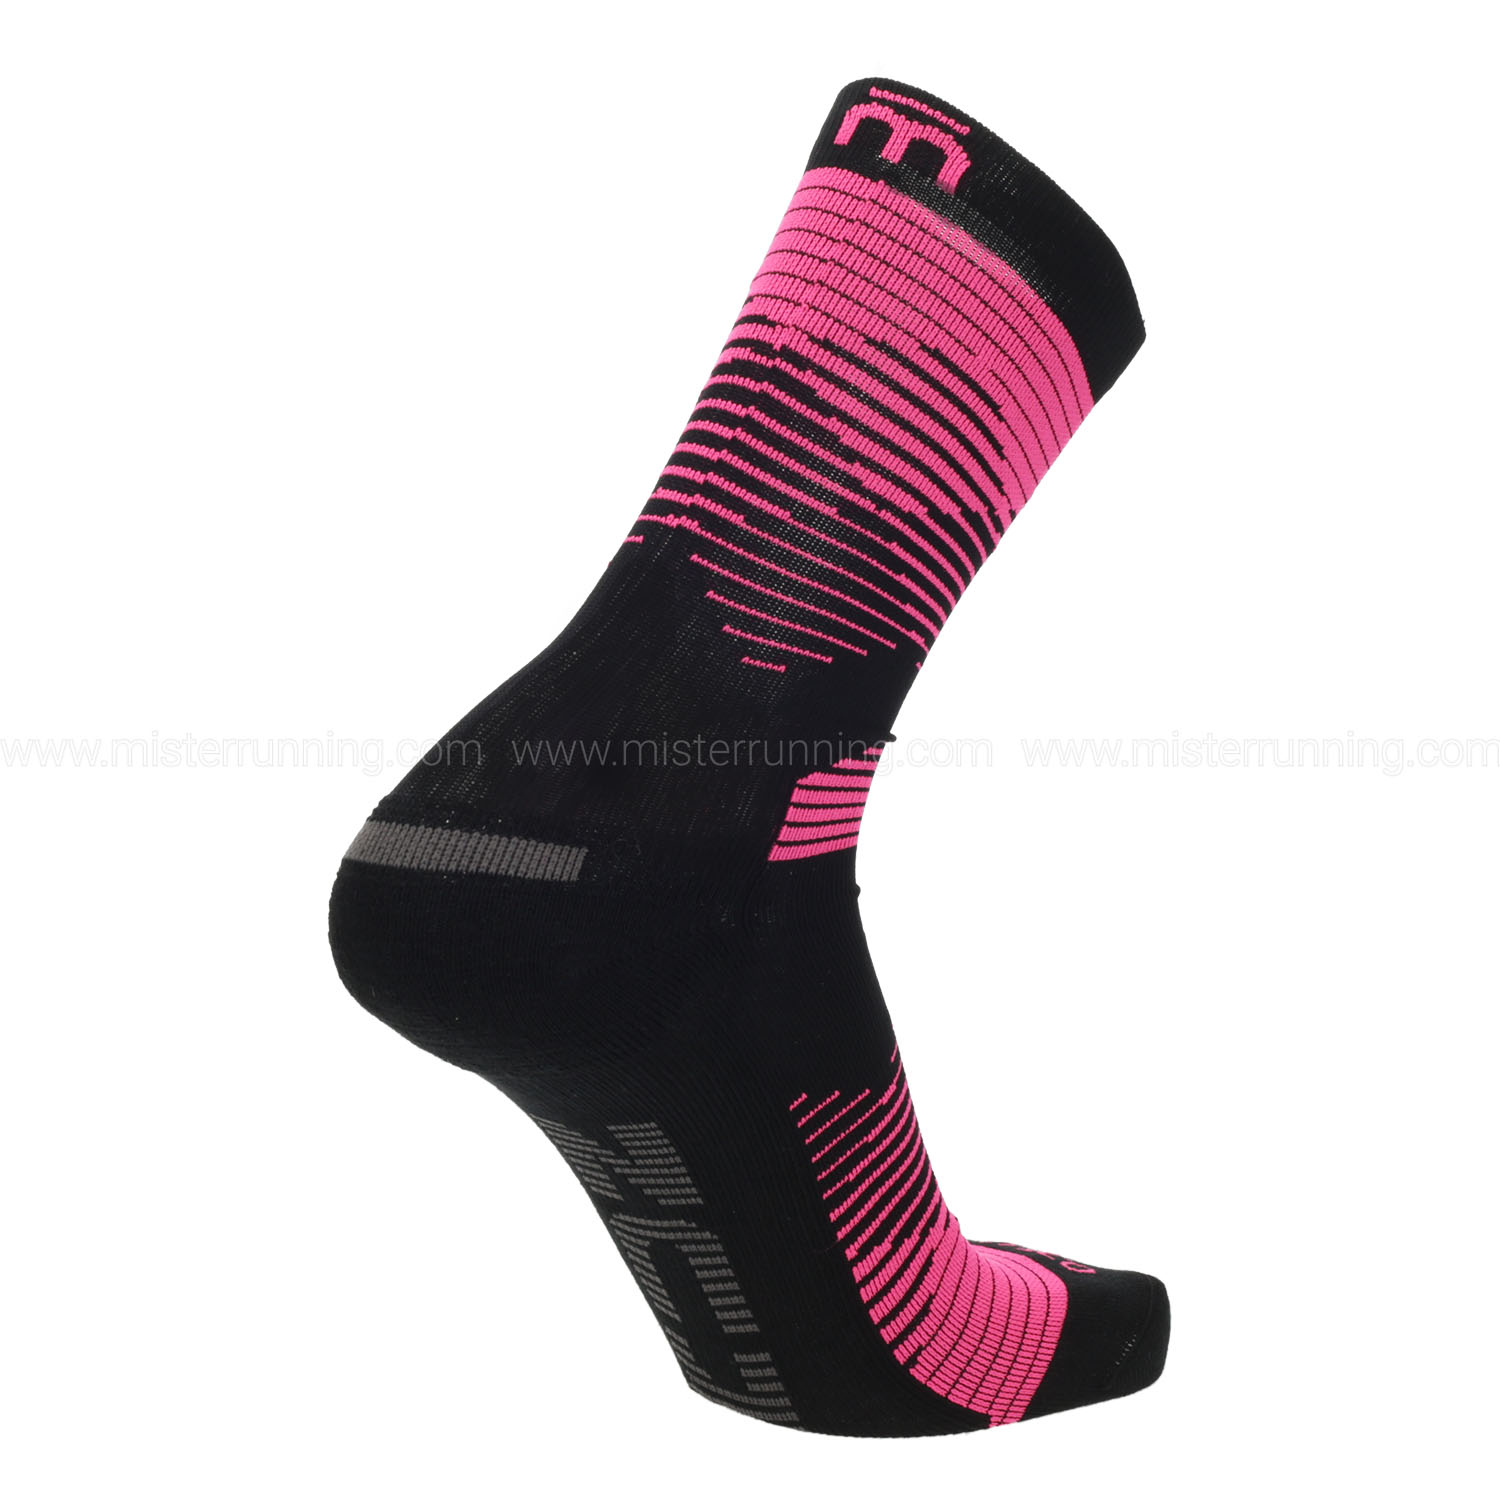 Mico Extra Dry Outlast Light Weight Calze - Nero/Fucsia Fluo